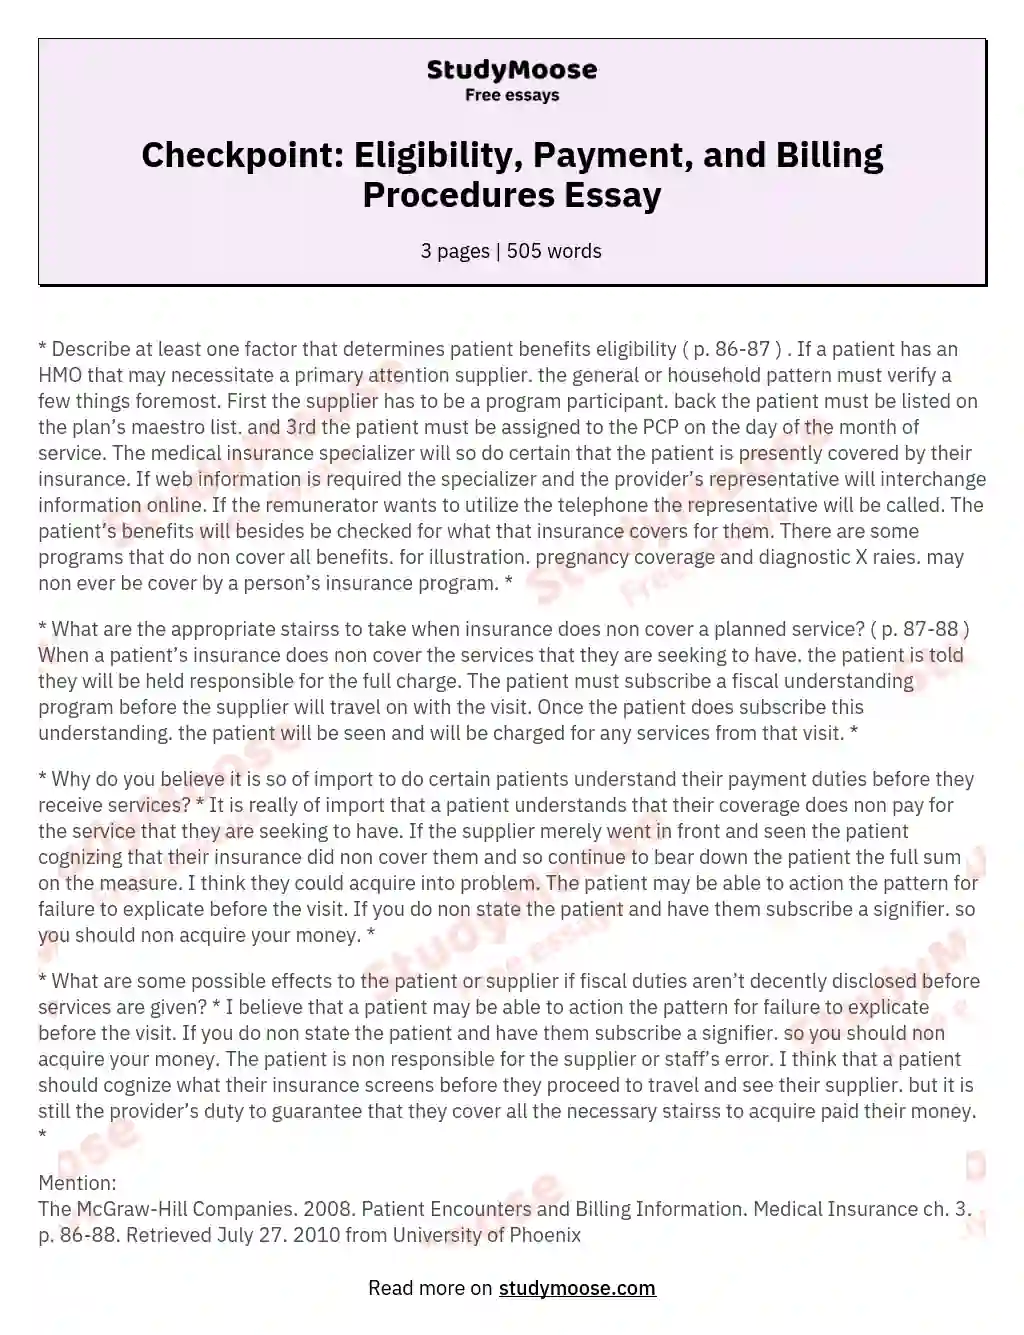 Checkpoint: Eligibility, Payment, and Billing Procedures Essay